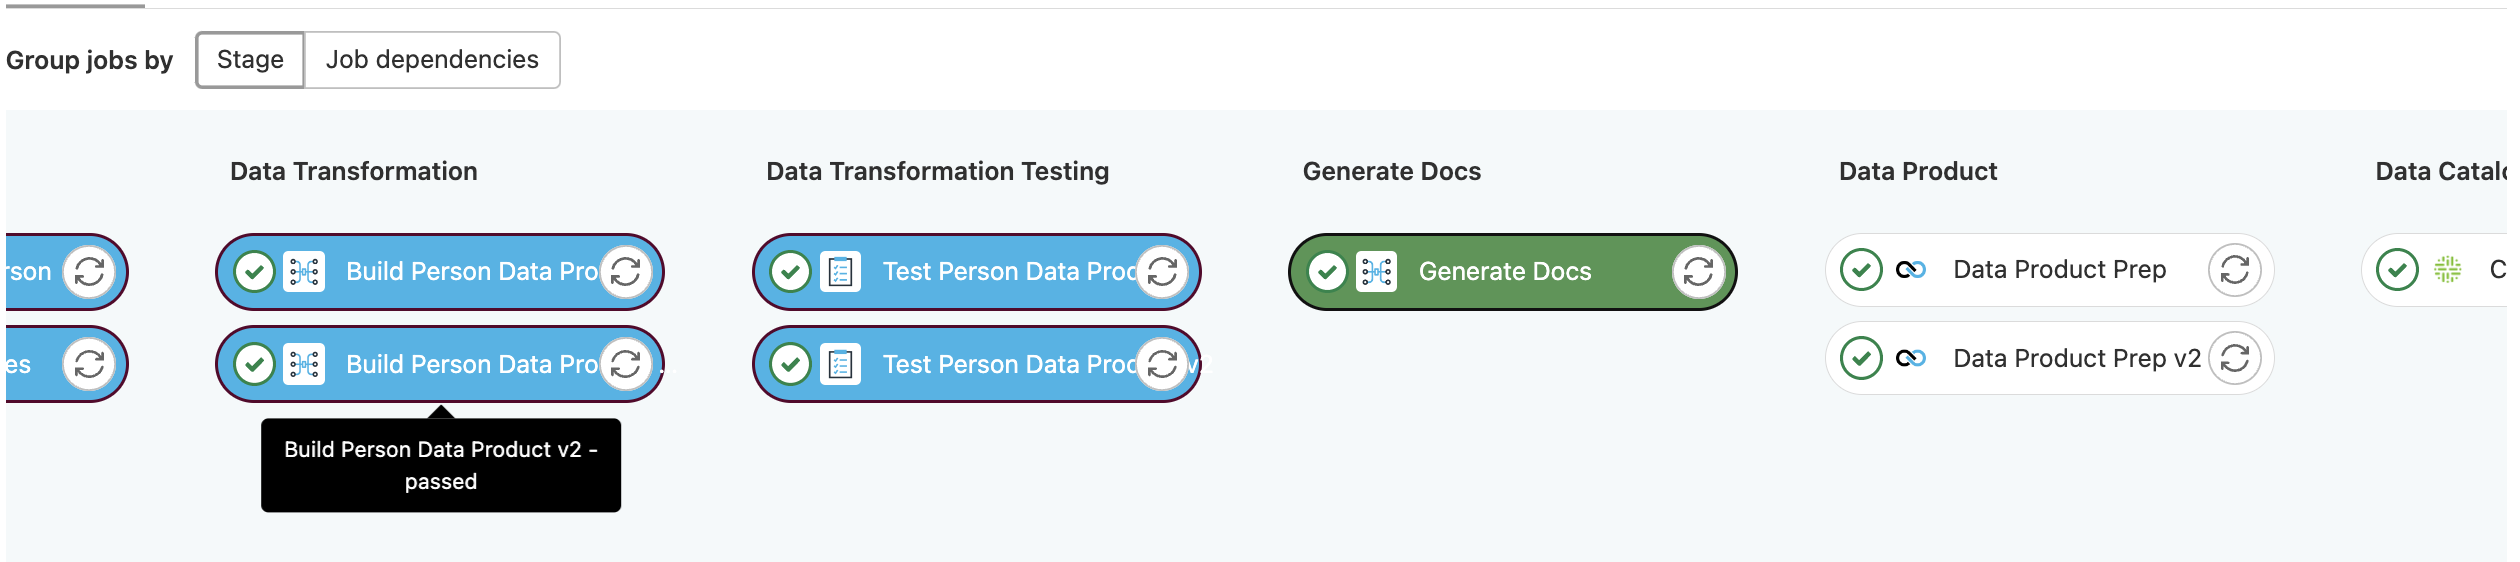 multi versioning of data products __shadow__